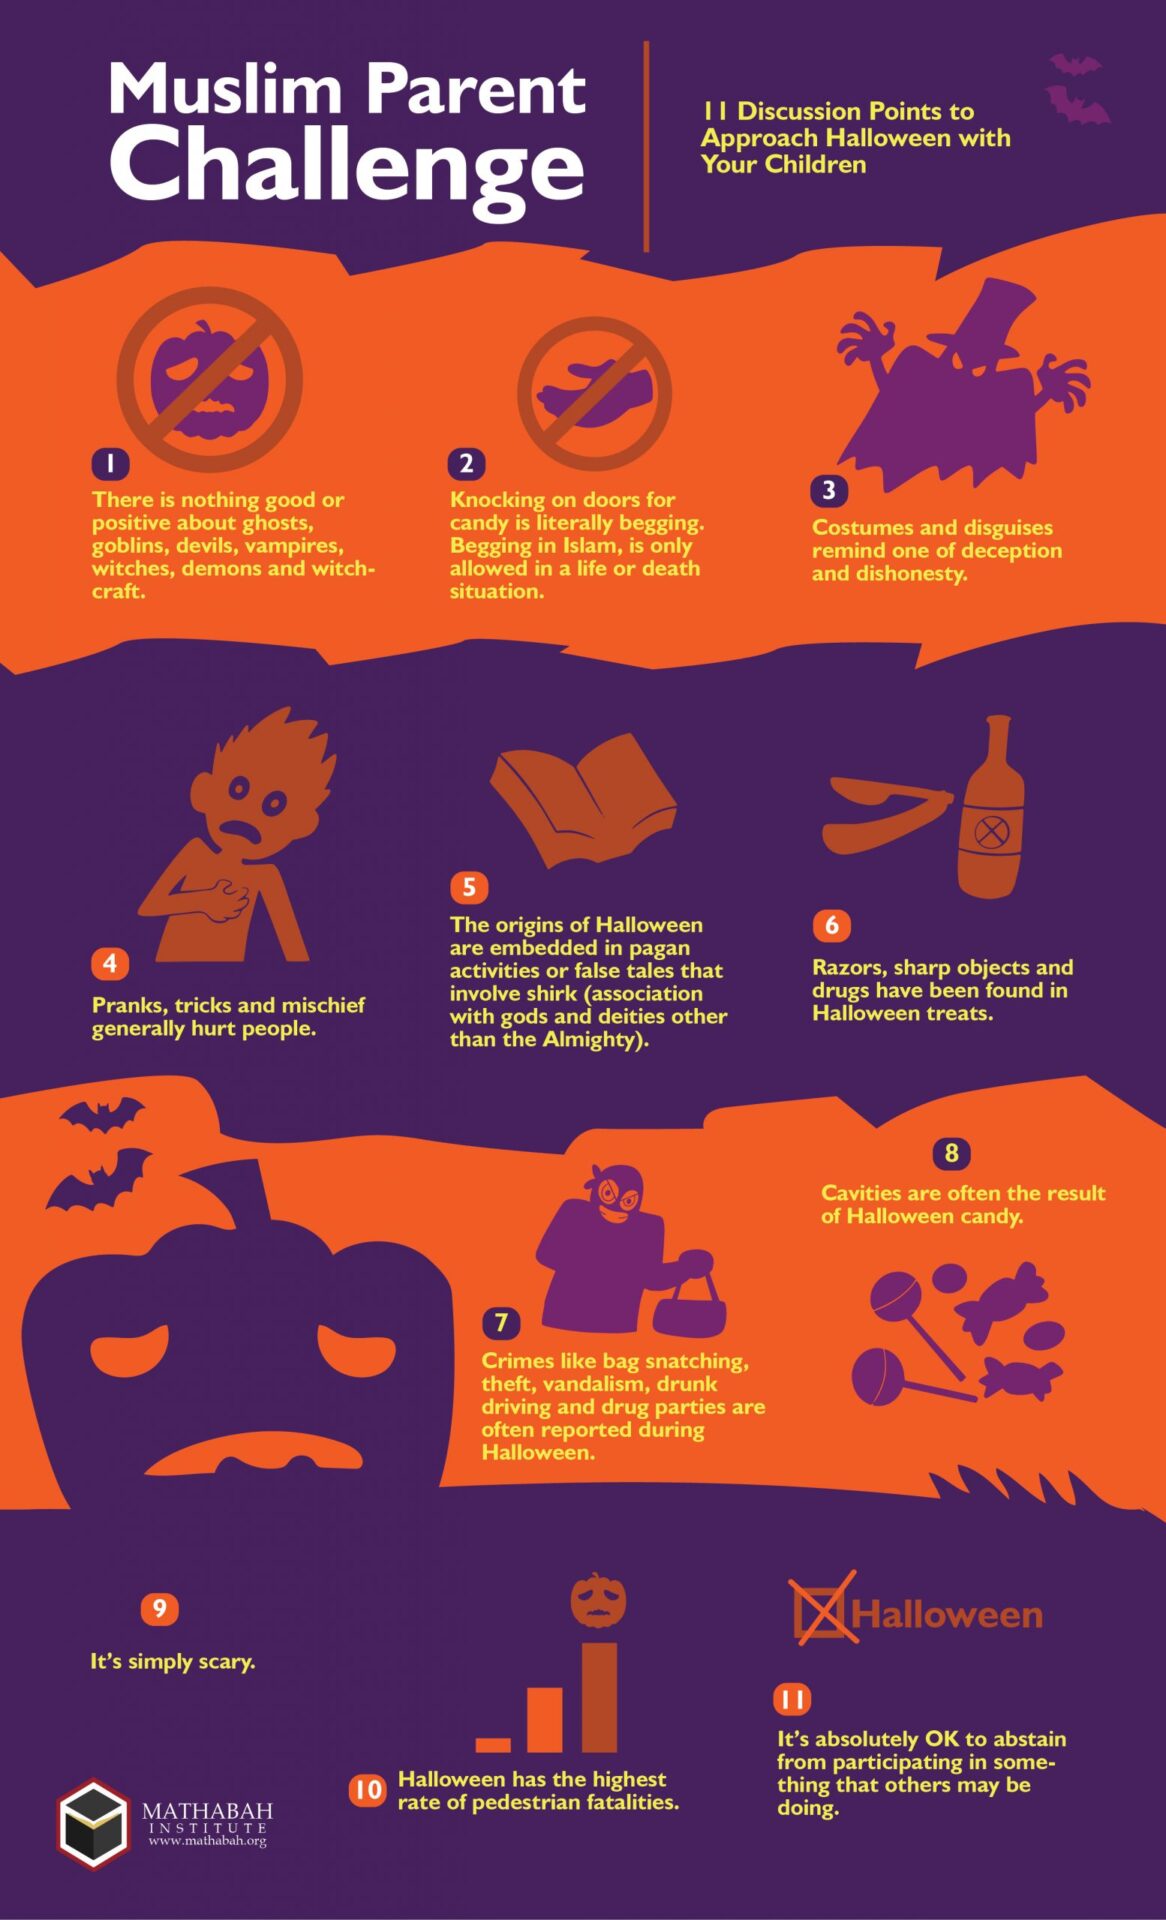 Everything You Wanted to Know About Halloween and Islam